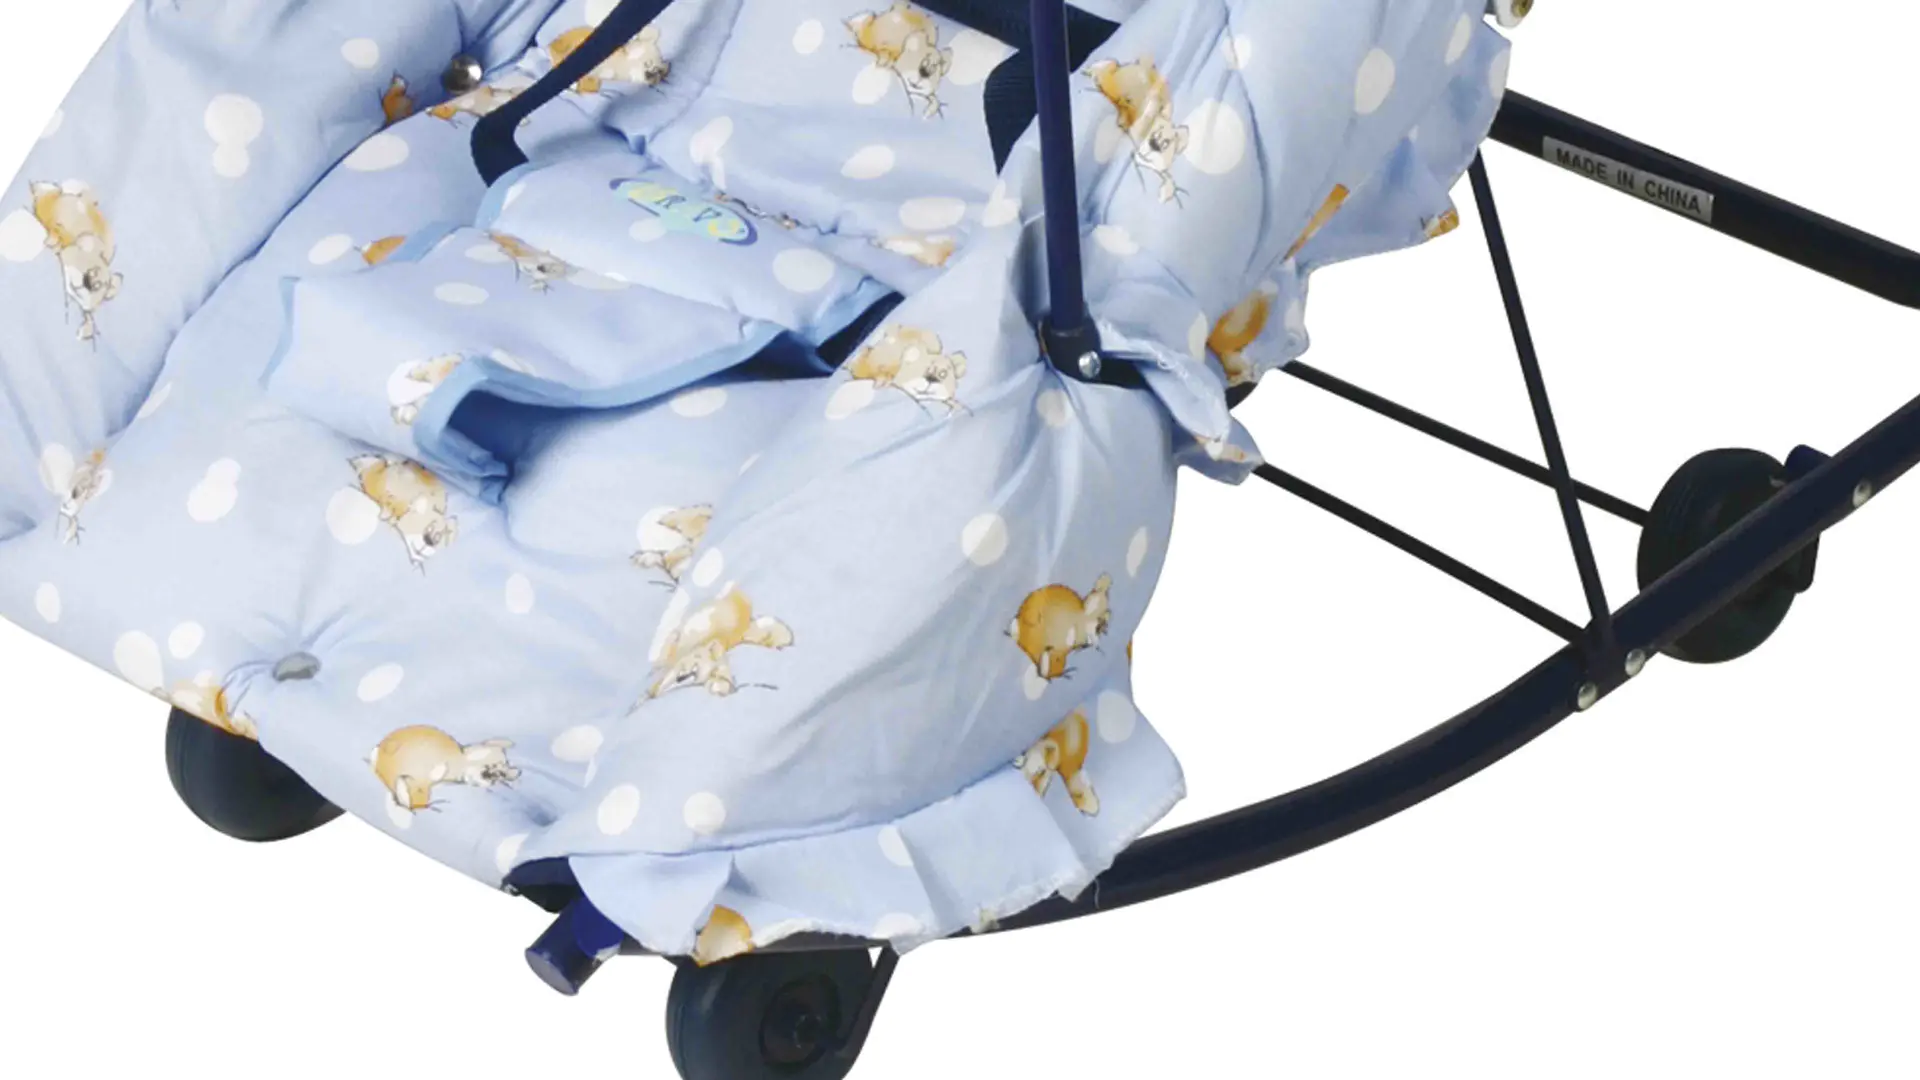 swing infant rocking chair supplier for bedroom